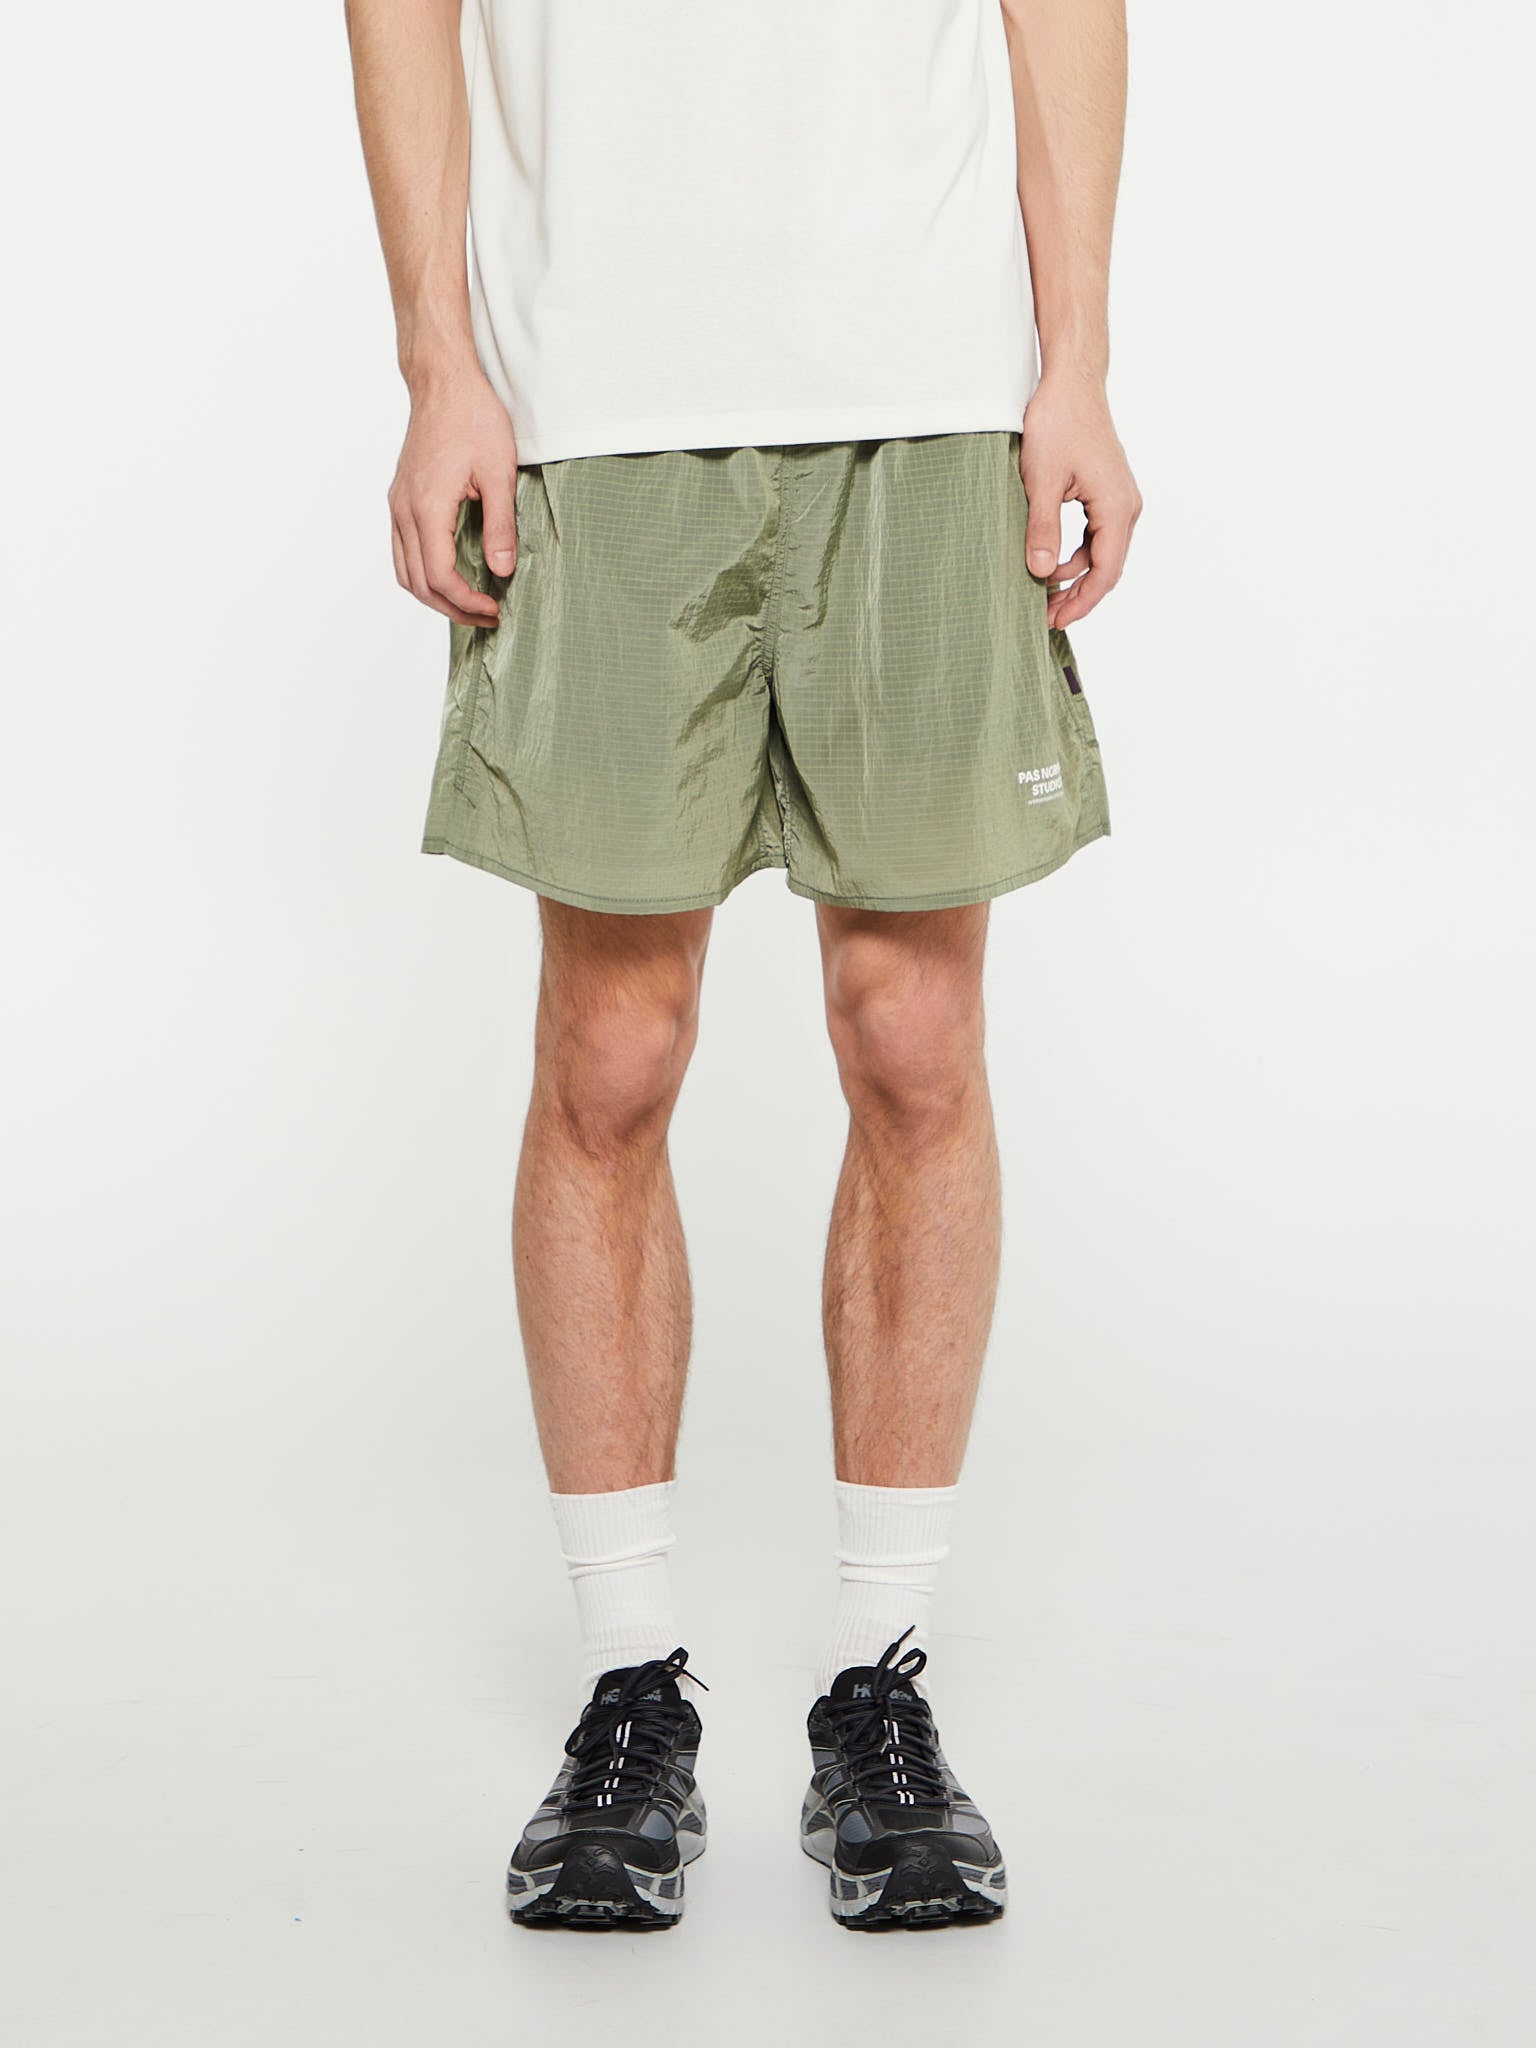 Pas Normal Studios - Off-Race Ripstop Shorts in Army Green